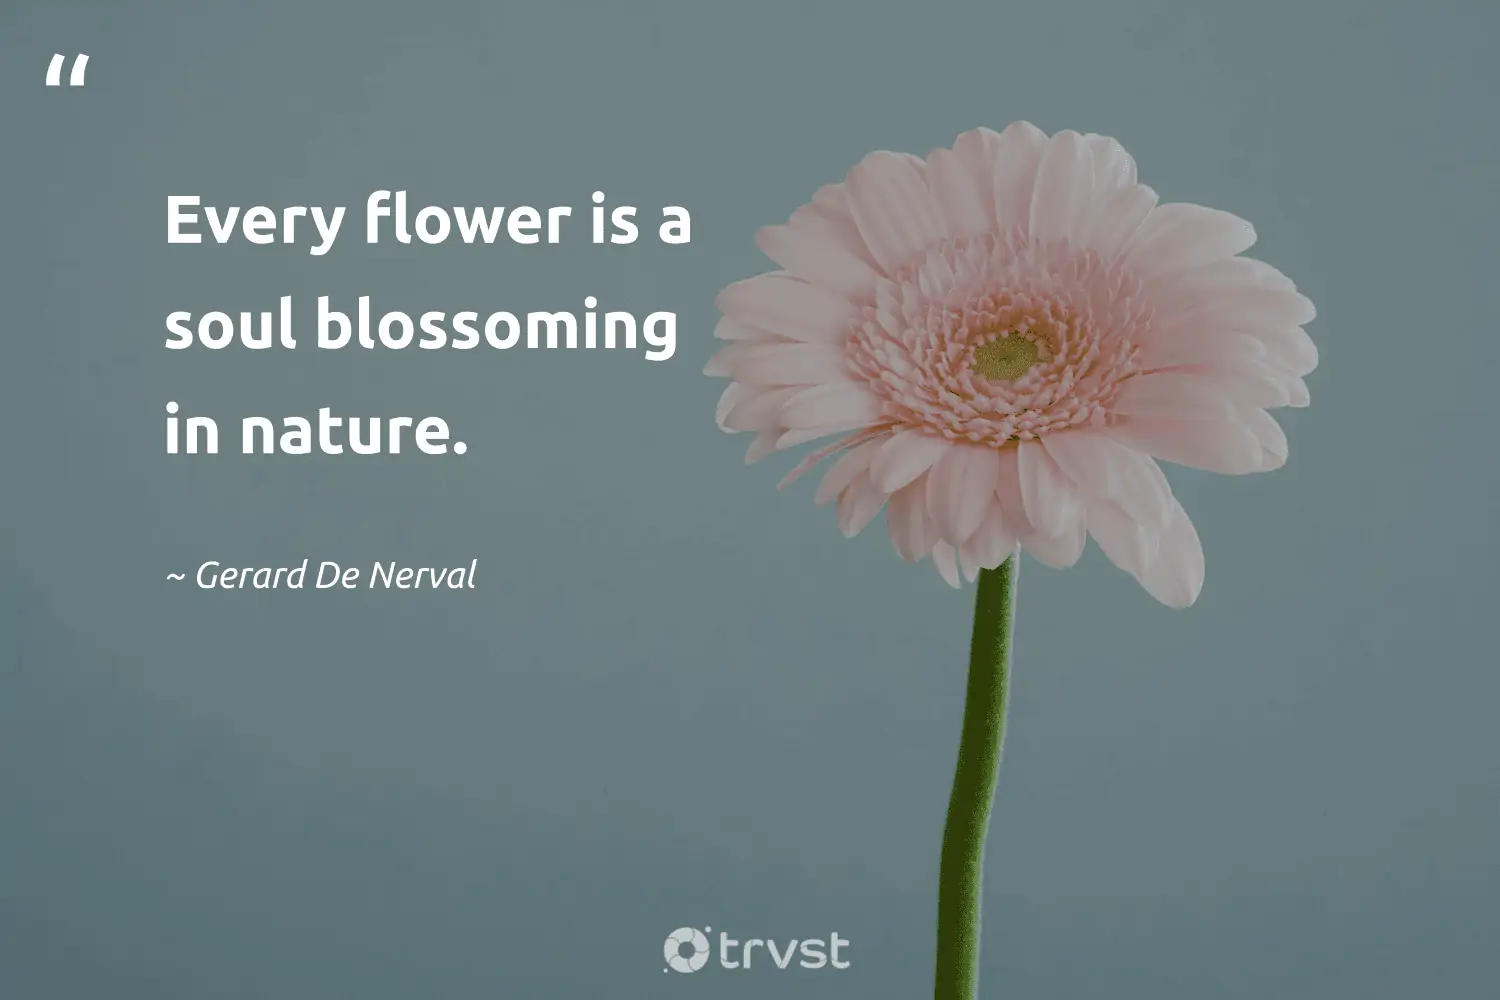 Astonishing Collection of Full 4K Flower Images with Quotes: Over 999+ to Choose From